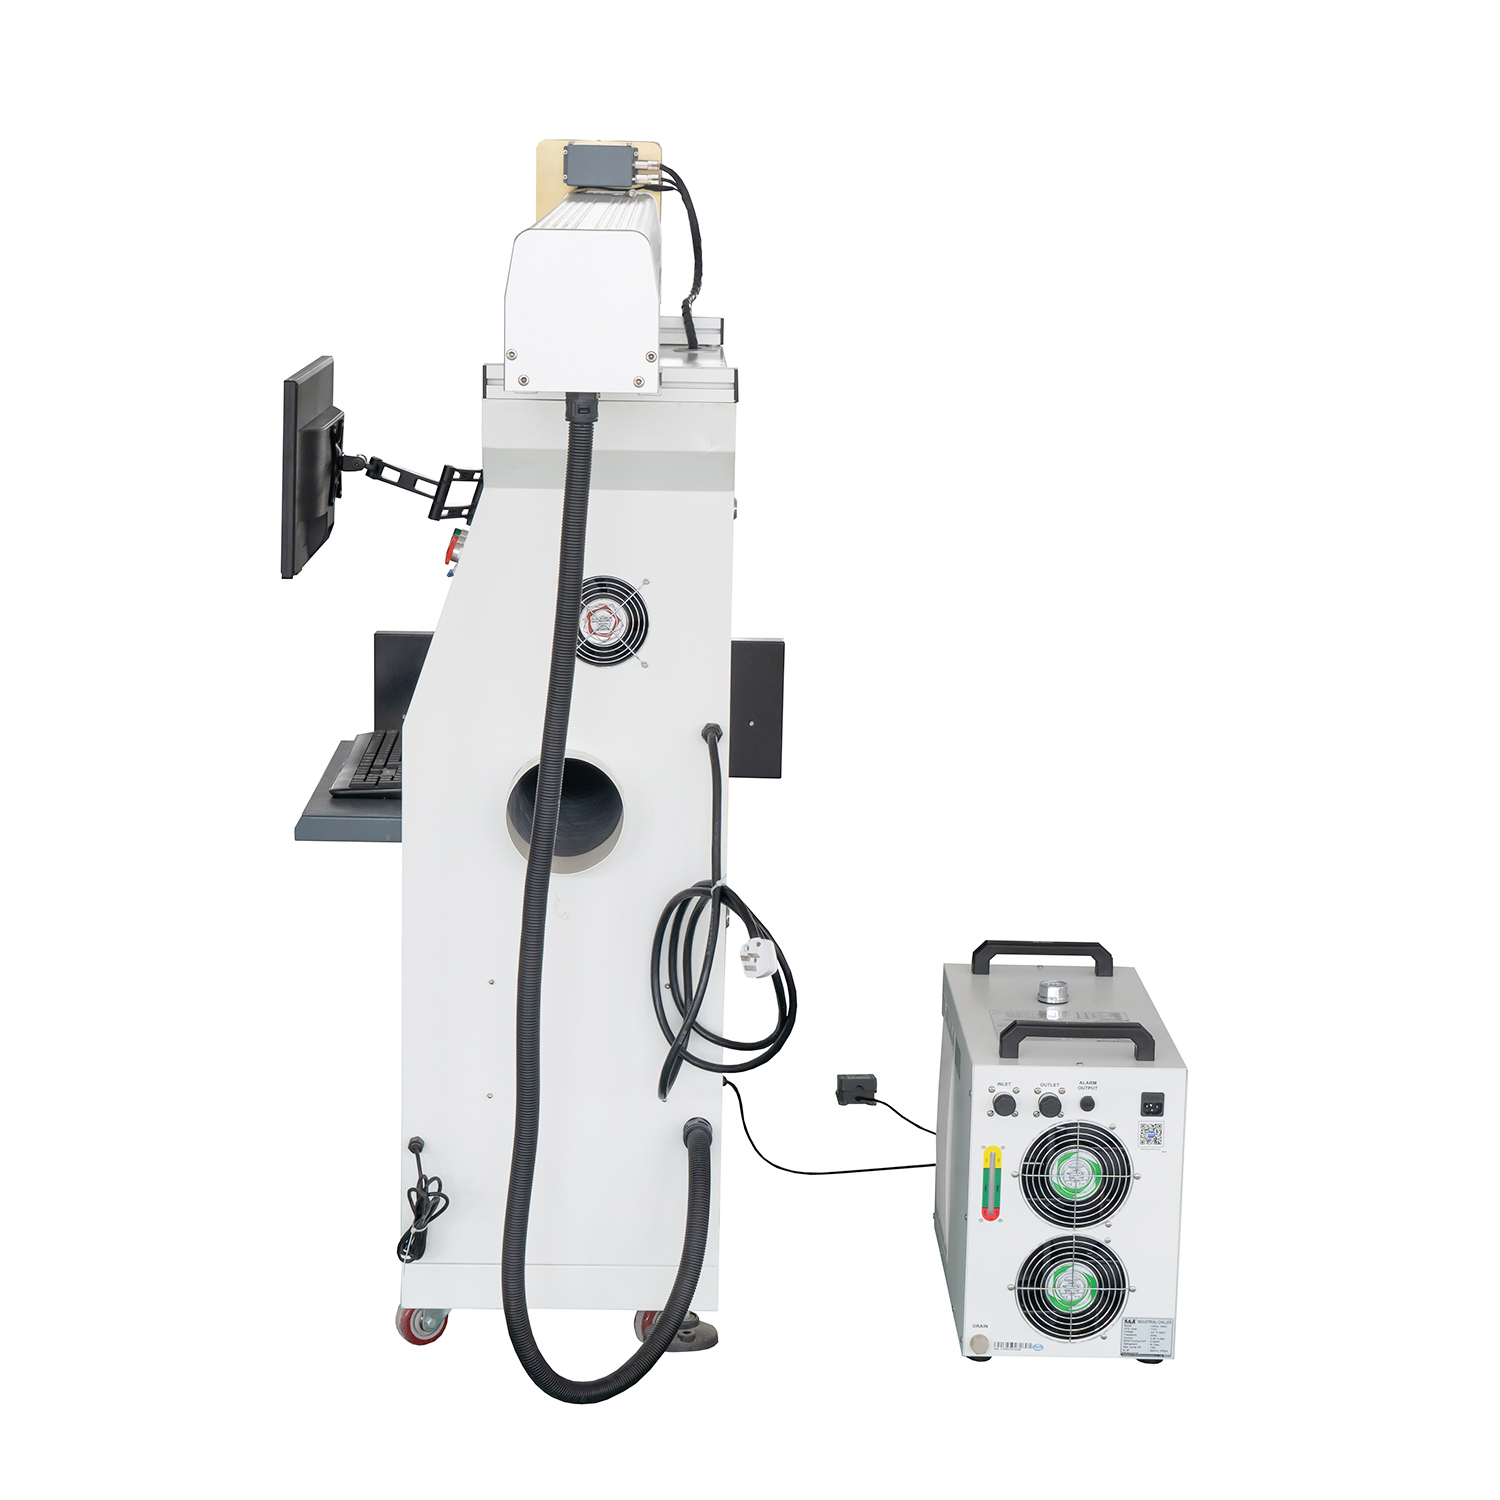 3D dynamic focusing Galvo co2 laser marking machine with glass laser tube for large area marking cutting